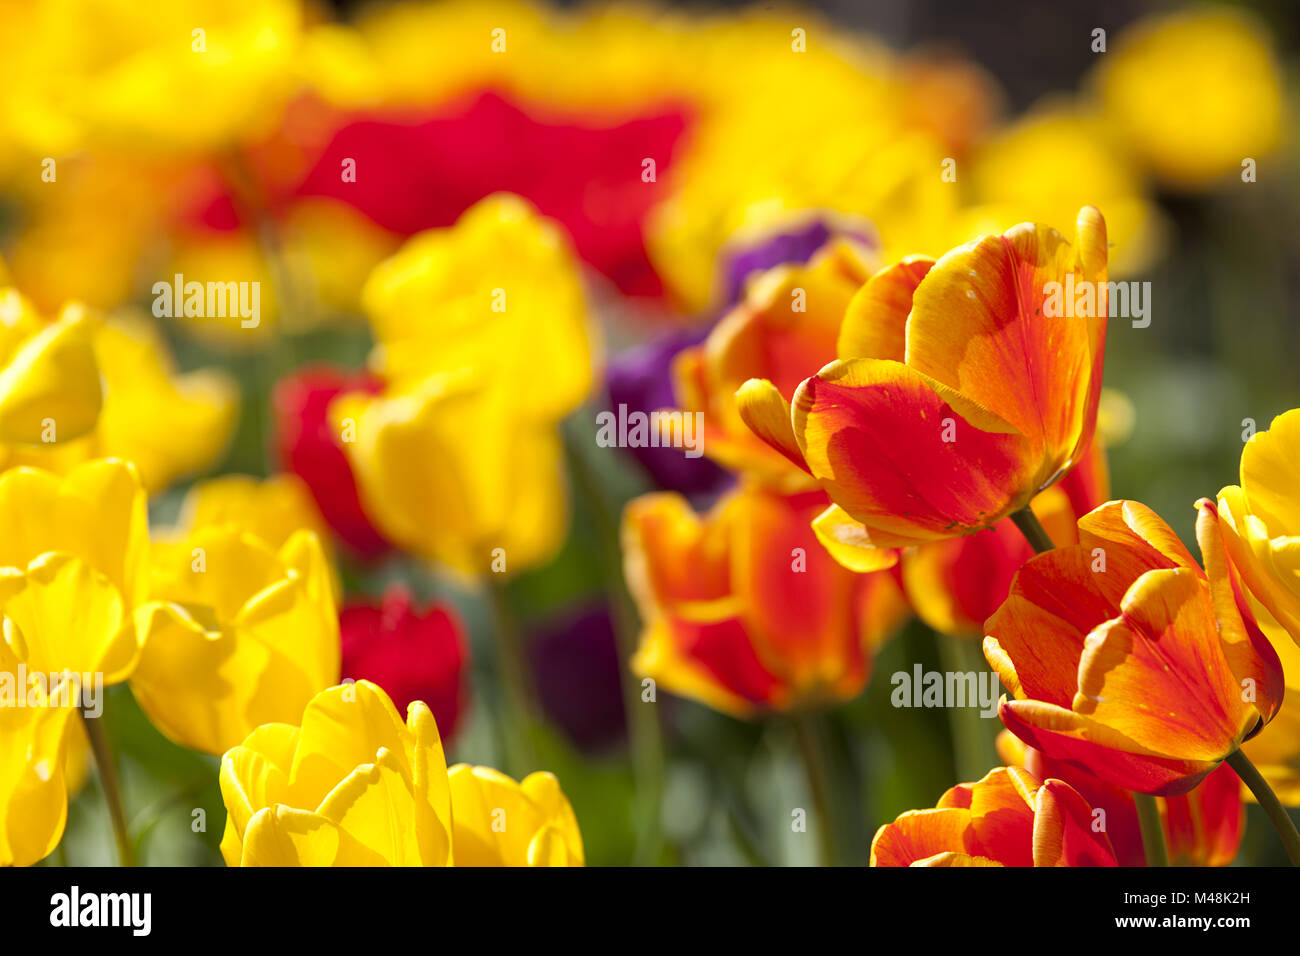 tulip in garden flowers with bright colors yellow and red Stock Photo